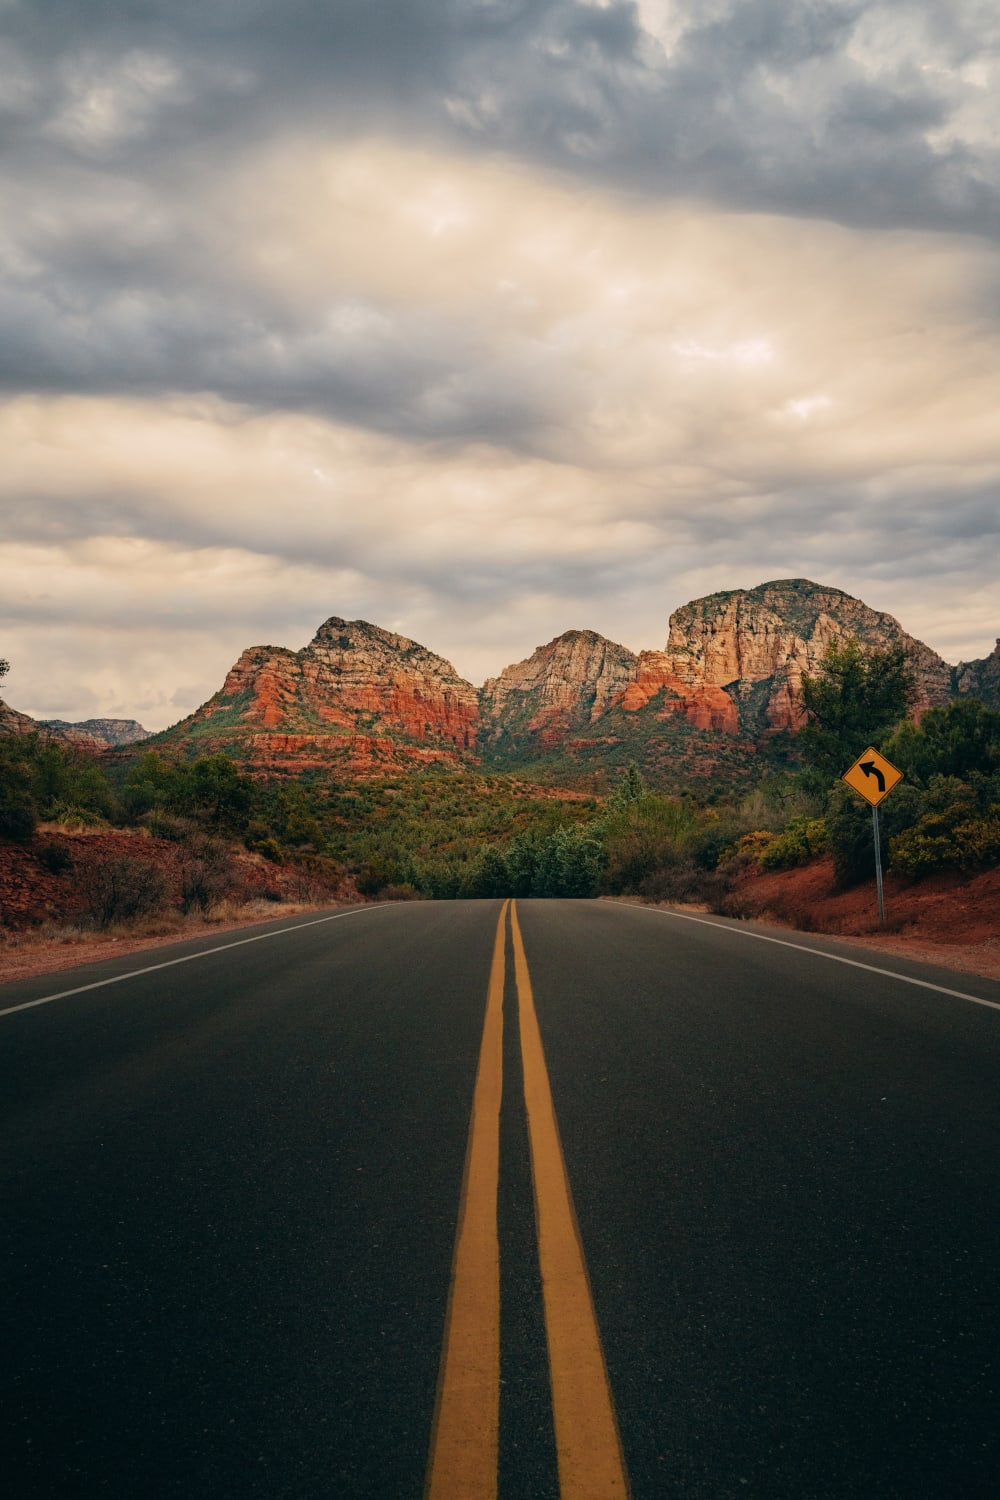 One of my best shots from Sedona on a Salt Lake-Tucson roadtrip to link up with a pal back in December